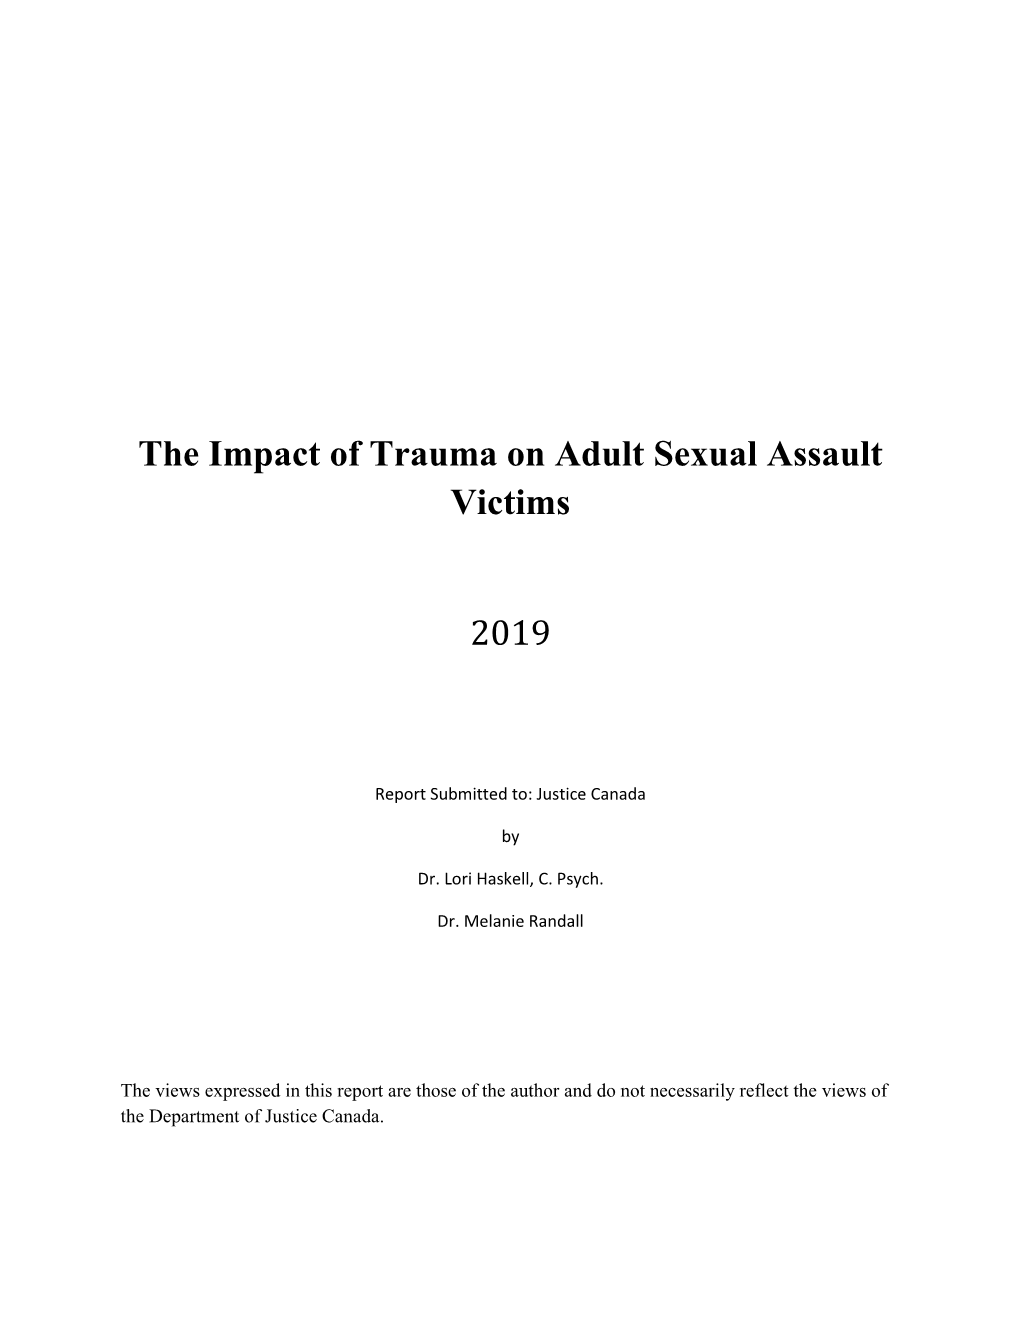 The Impact of Trauma on Adult Sexual Assault Victims